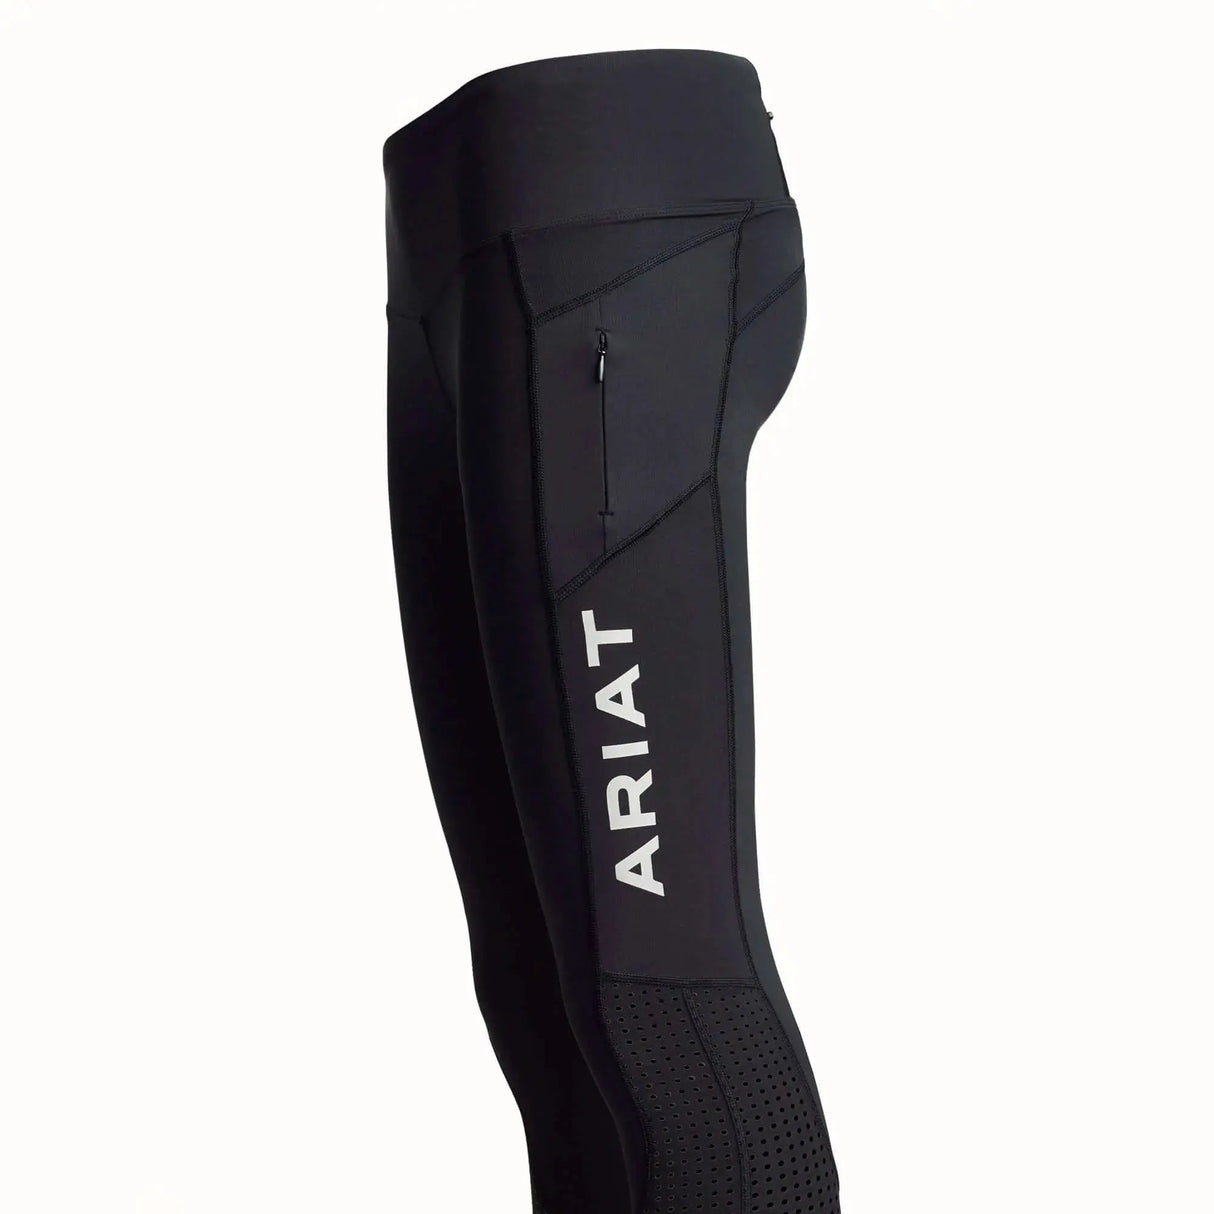 Ariat Ladies EOS Riding Tights With Phone Pocket And Logo Full Seat Black X Small Ariat Legwear Barnstaple Equestrian Supplies